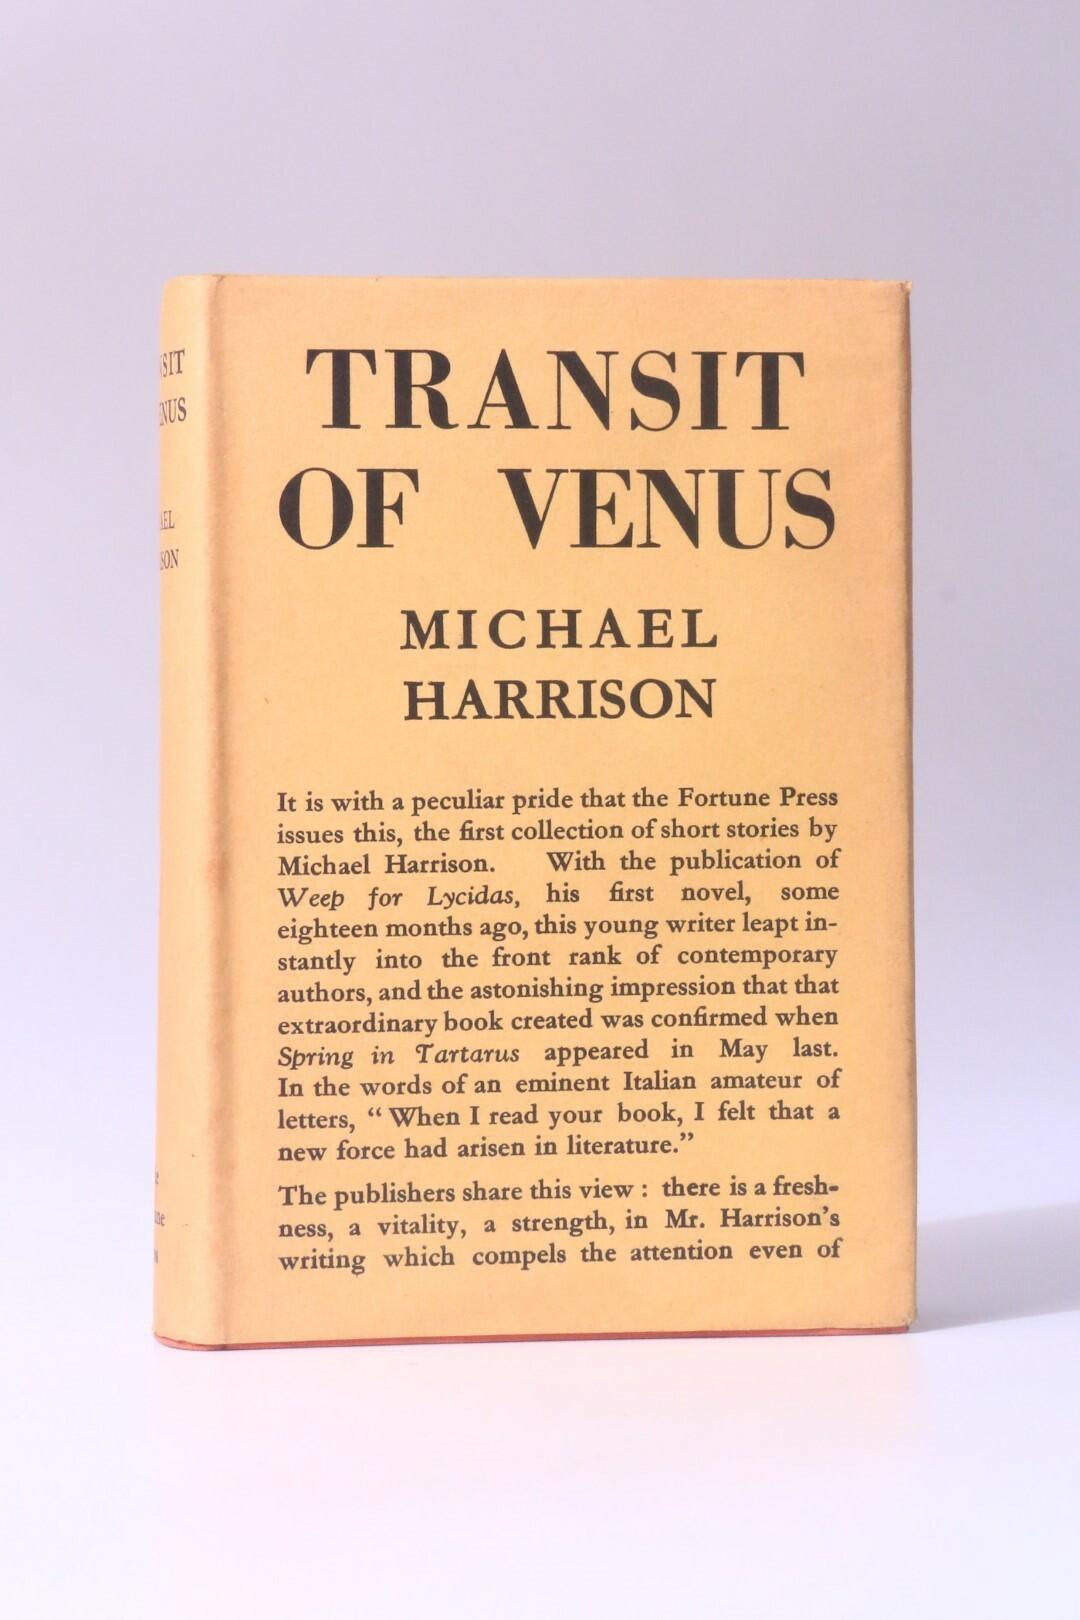 Michael Harrison - Transit of Venus - The Fortune Press, 1936, First Edition.